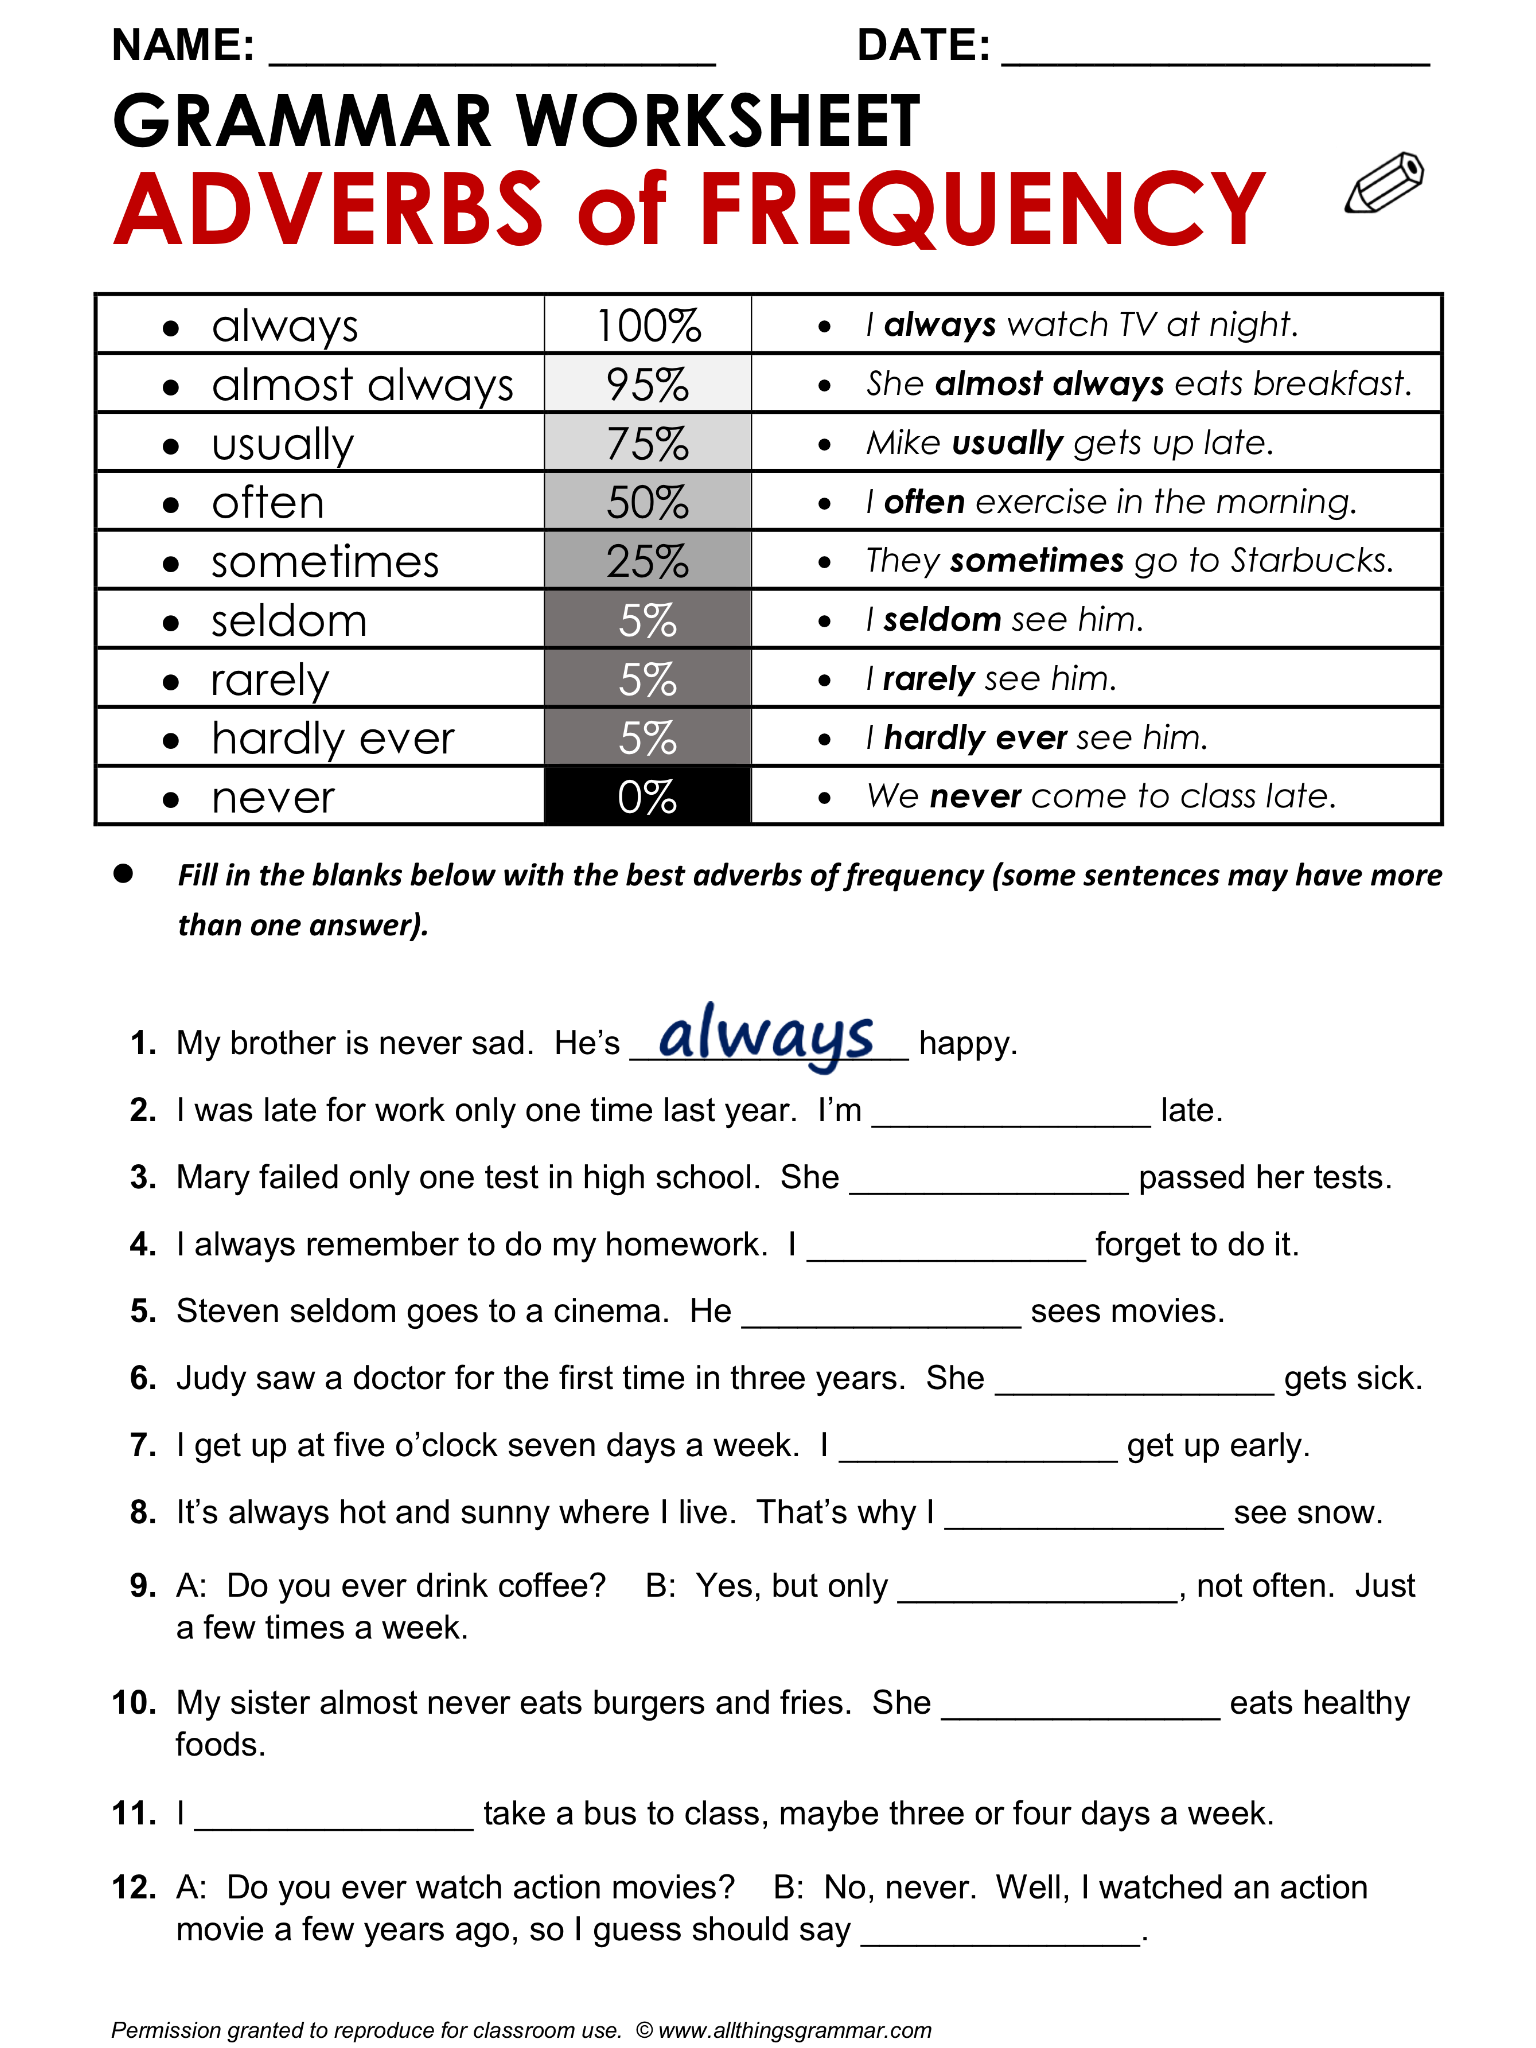 Adverbs Of Frequency Worksheets